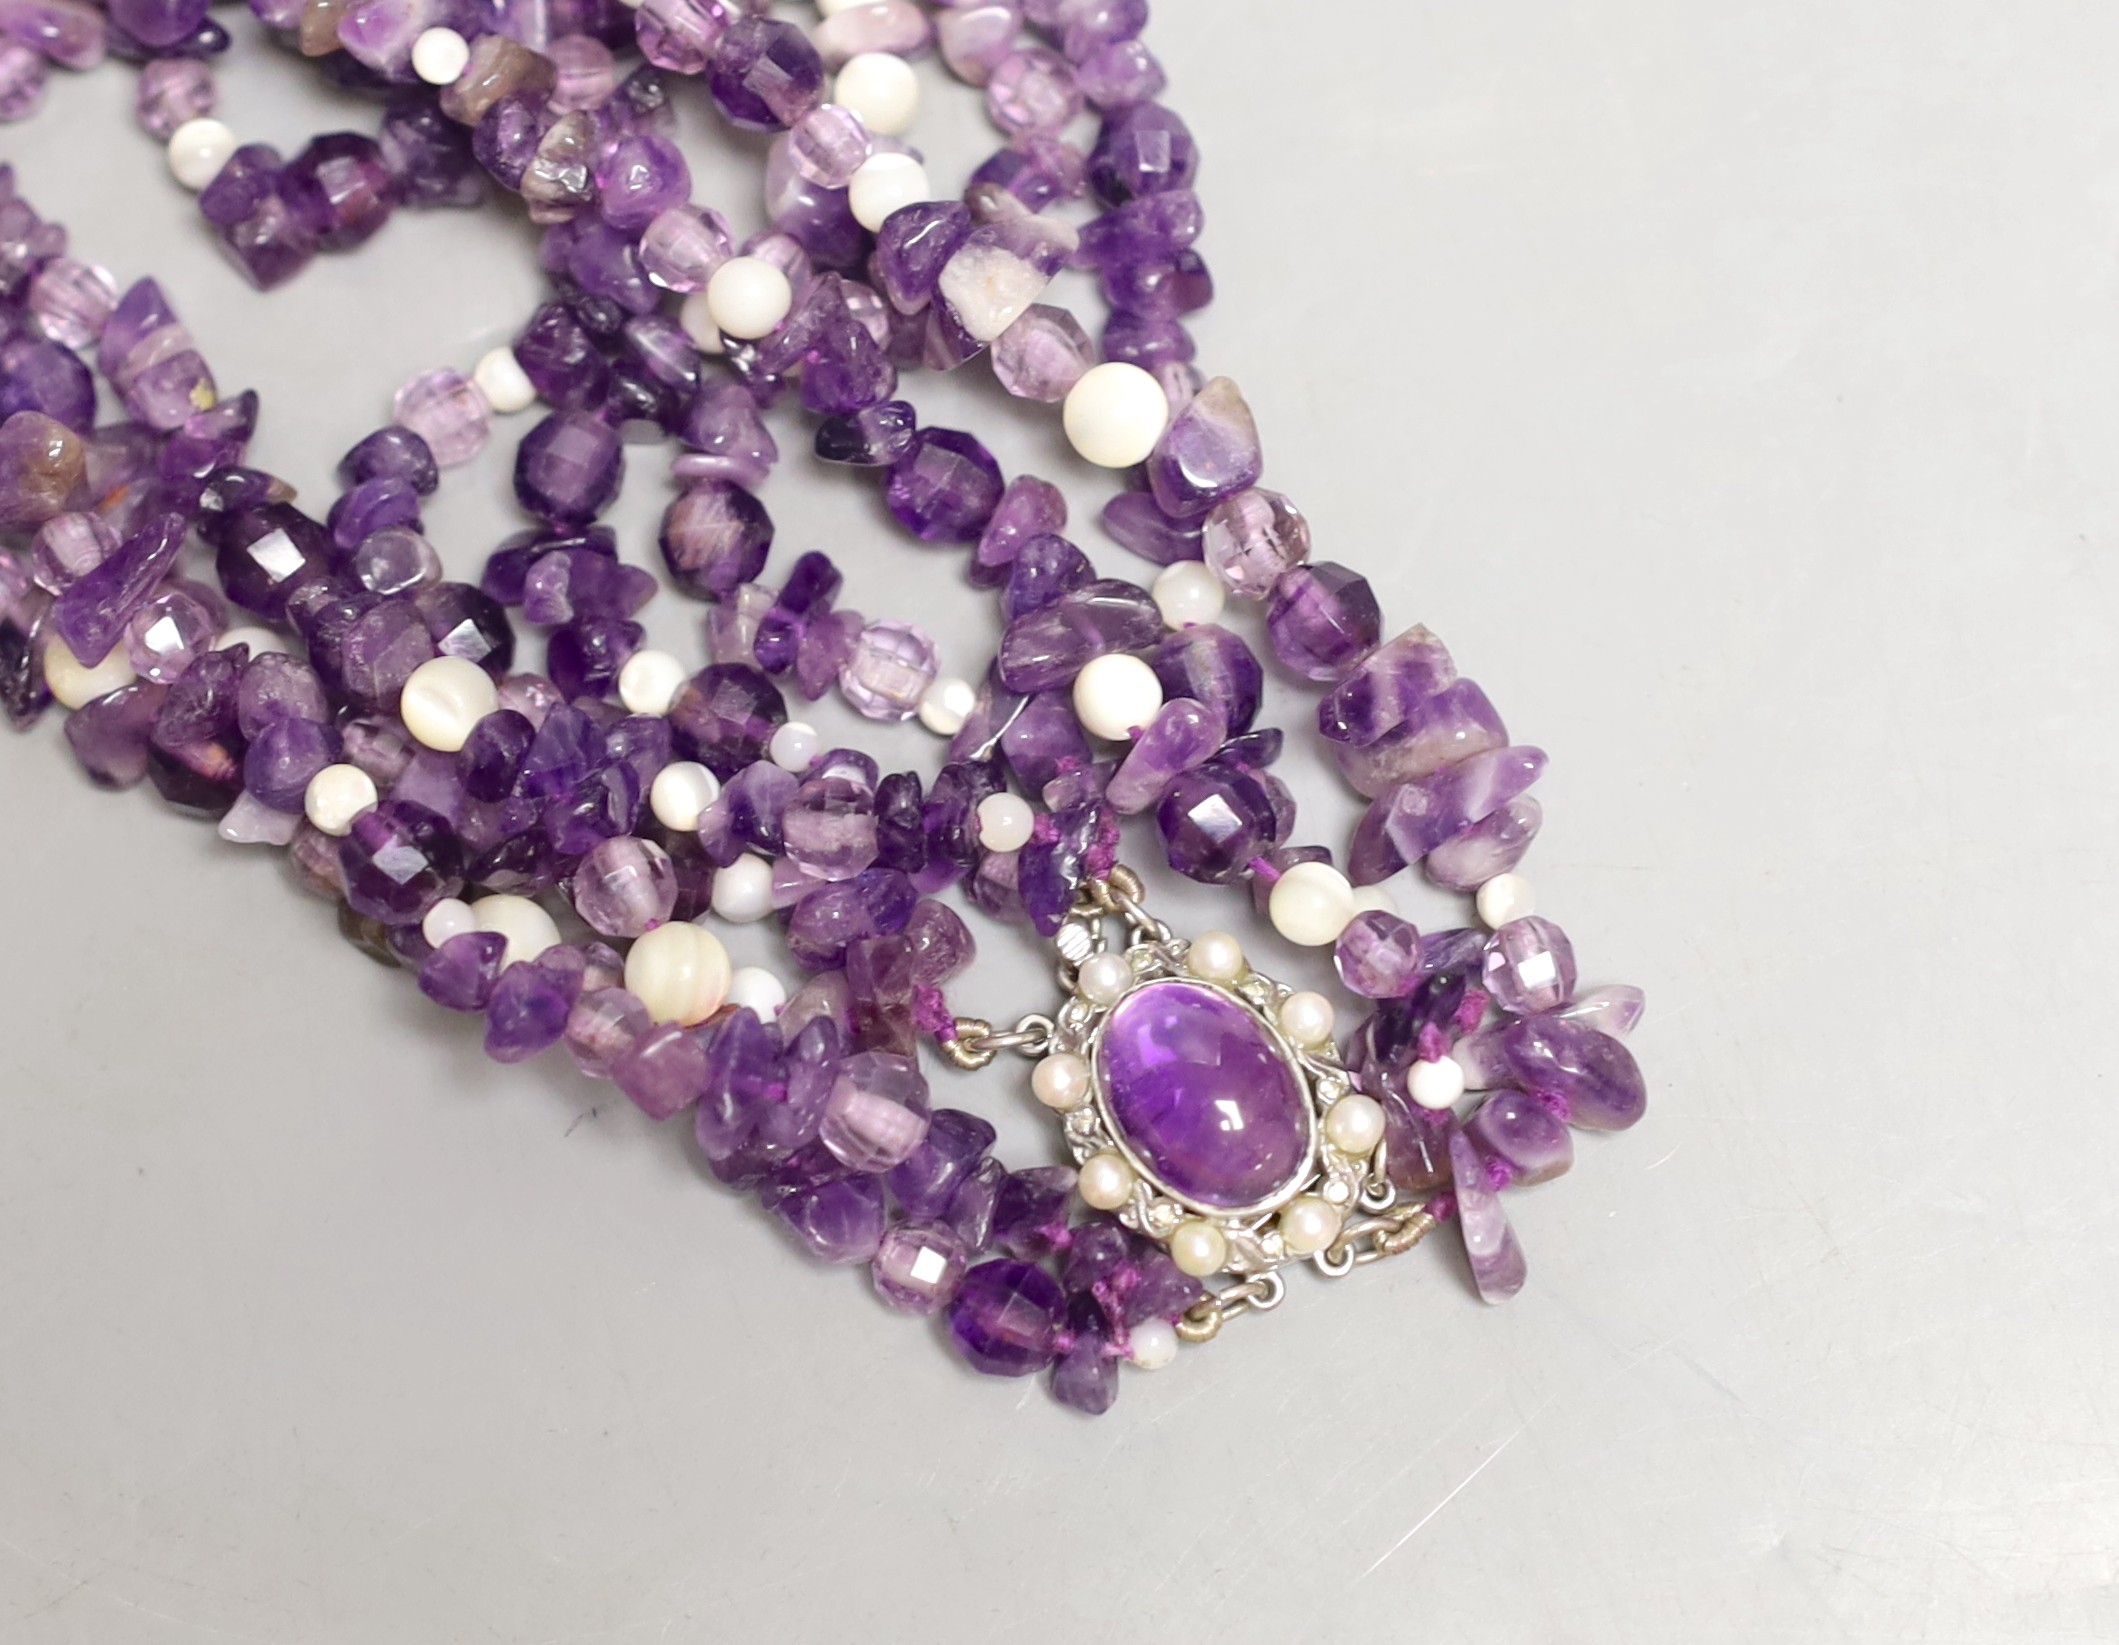 A quadruple strand amethyst pebble necklace, with white bead spacers and white metal clasp, 50cm